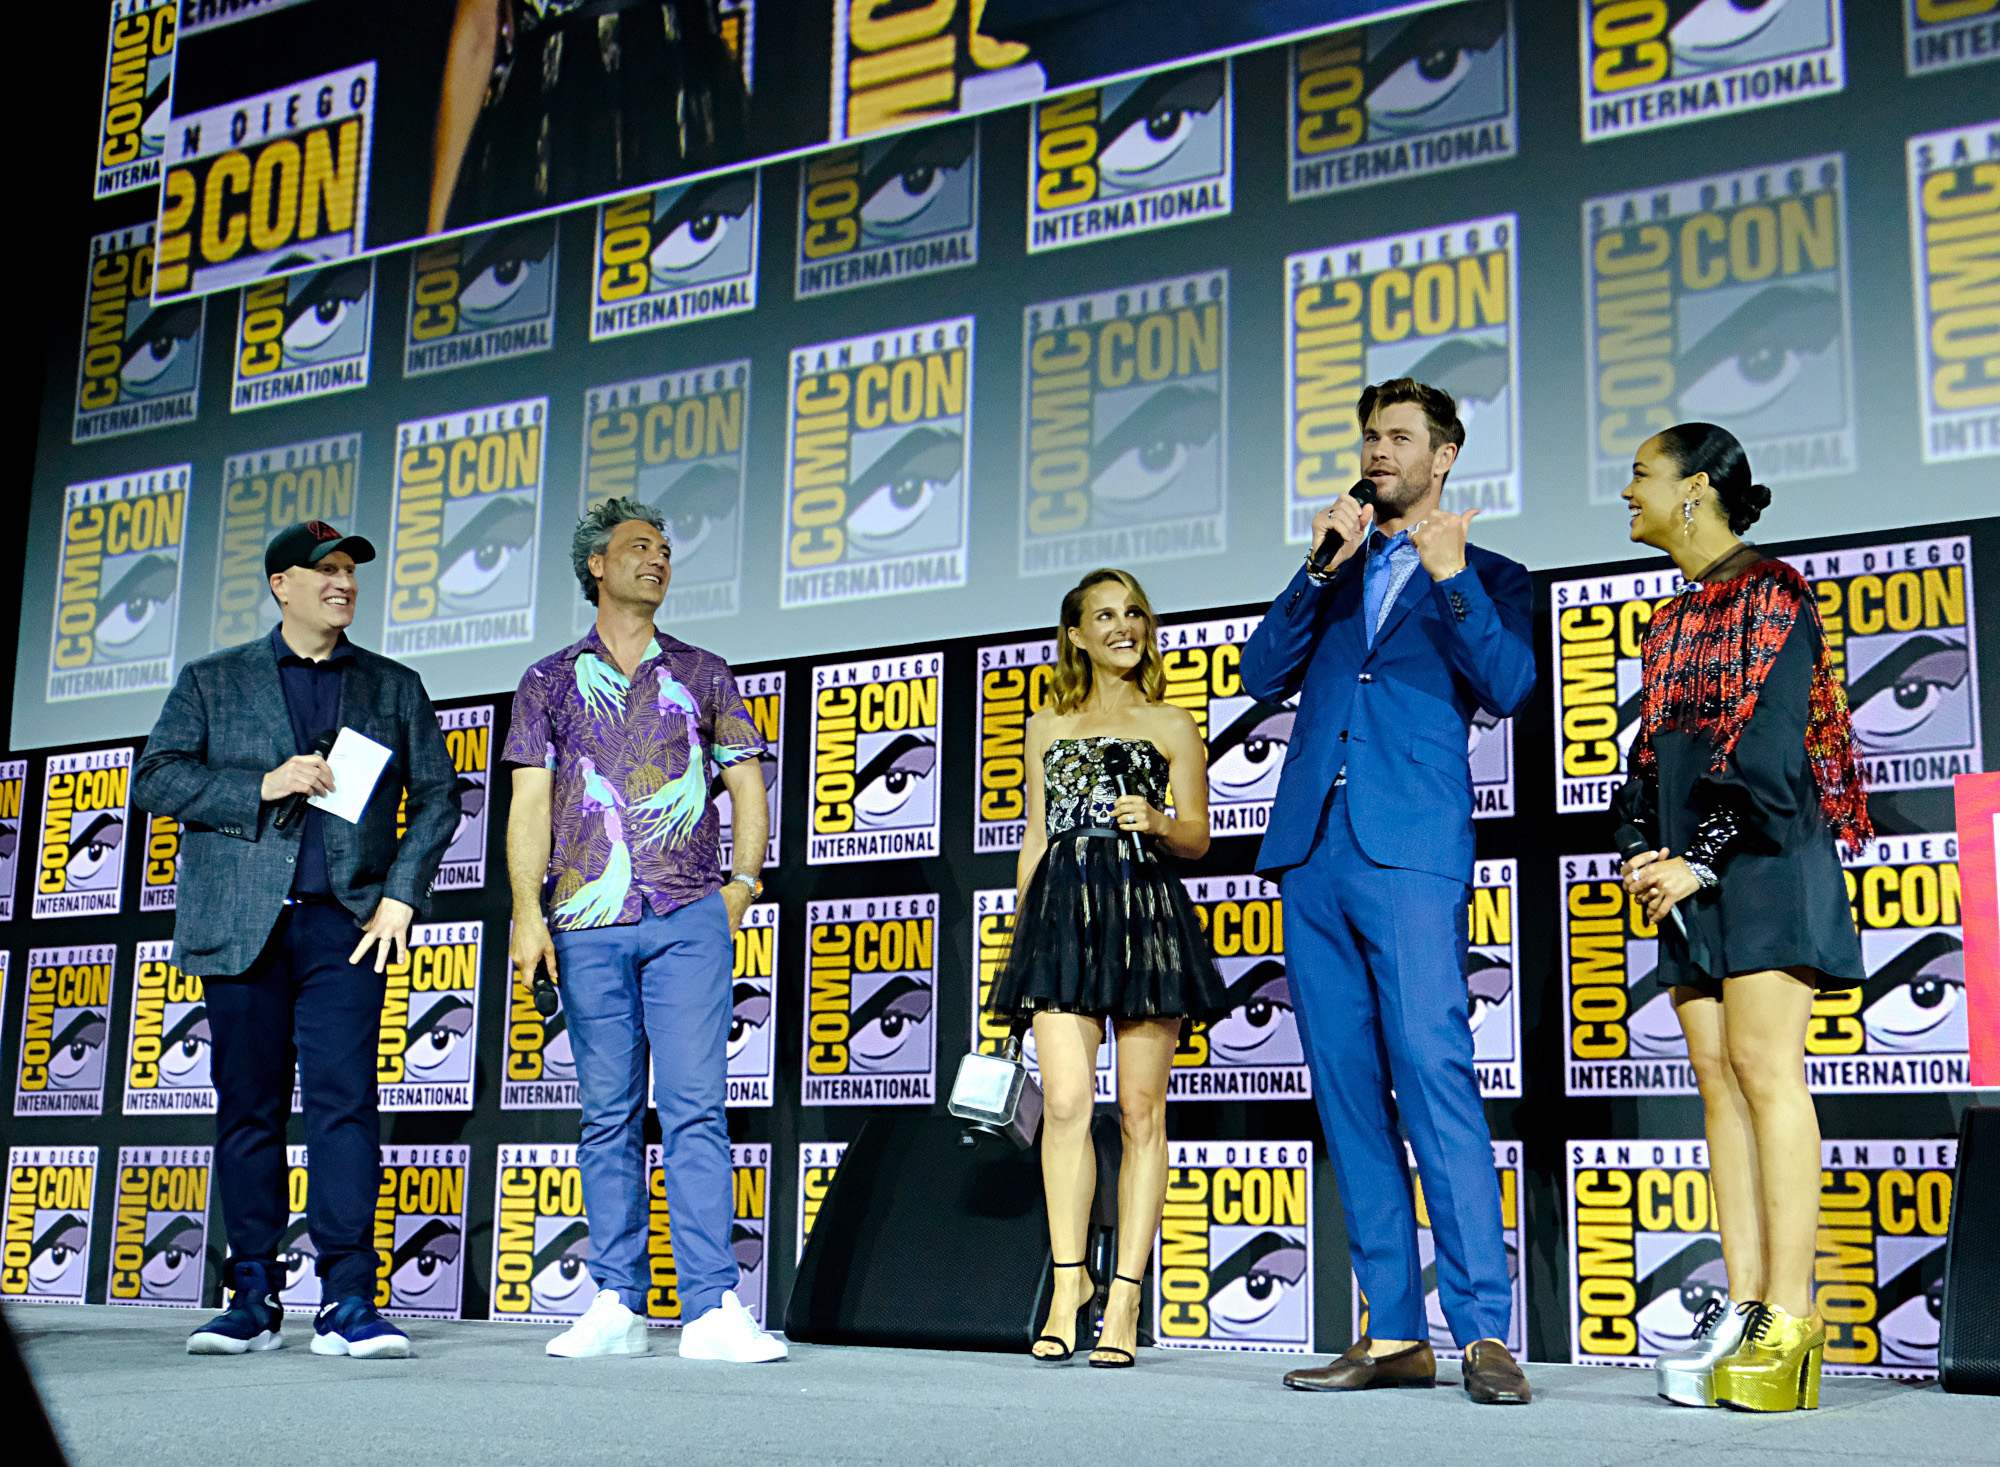 Kevin Feige, Taika Waititi, Natalie Portman, Chris Hemsworth, and Tessa Thompson at San Diego Comic-Con. They're promoting 'Thor: Love and Thunder,' which has a reported runtime of under two hours.